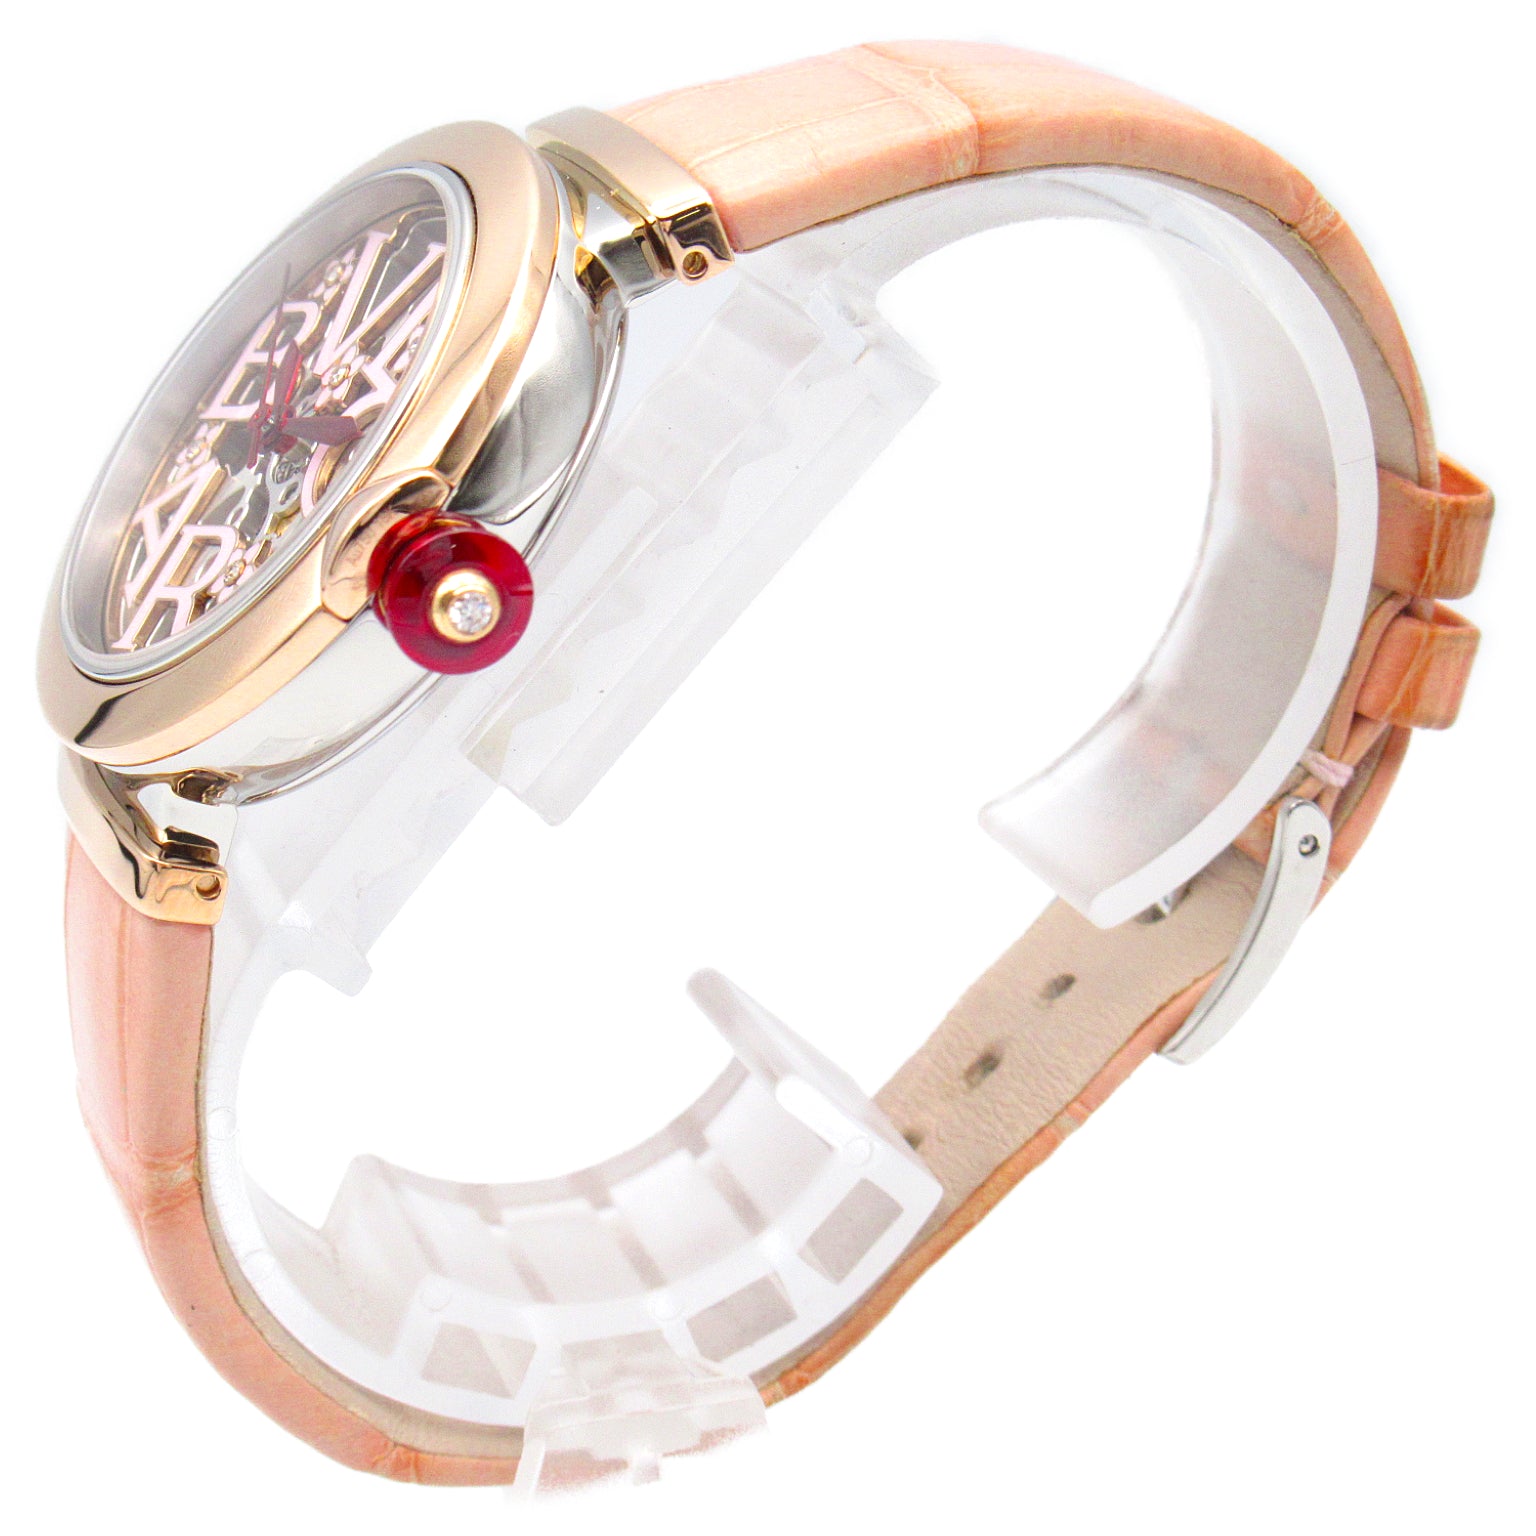 Bulgari BVLGARI Cherry Cherry  Watch K18PG (Pink G) Stainless Steel Leather  Pink / Clear / Skeleton LUP33SG